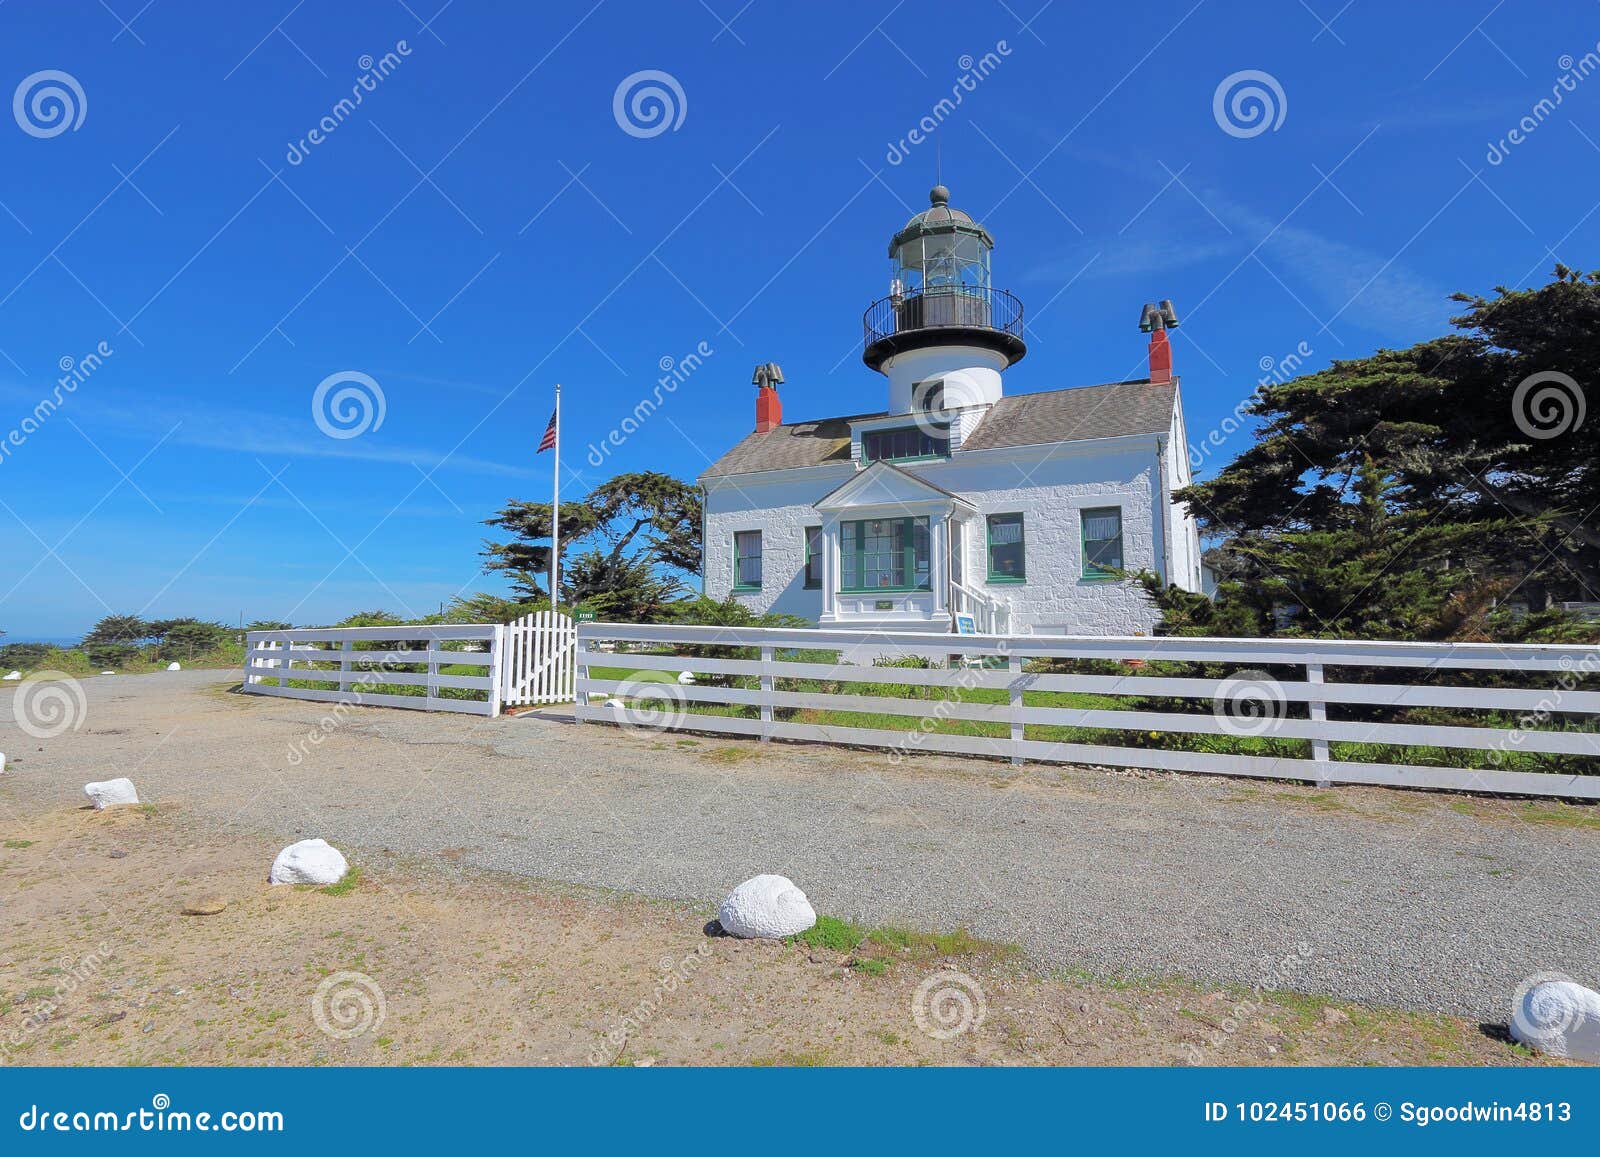 point pinos lighthouse in pacific grove, california